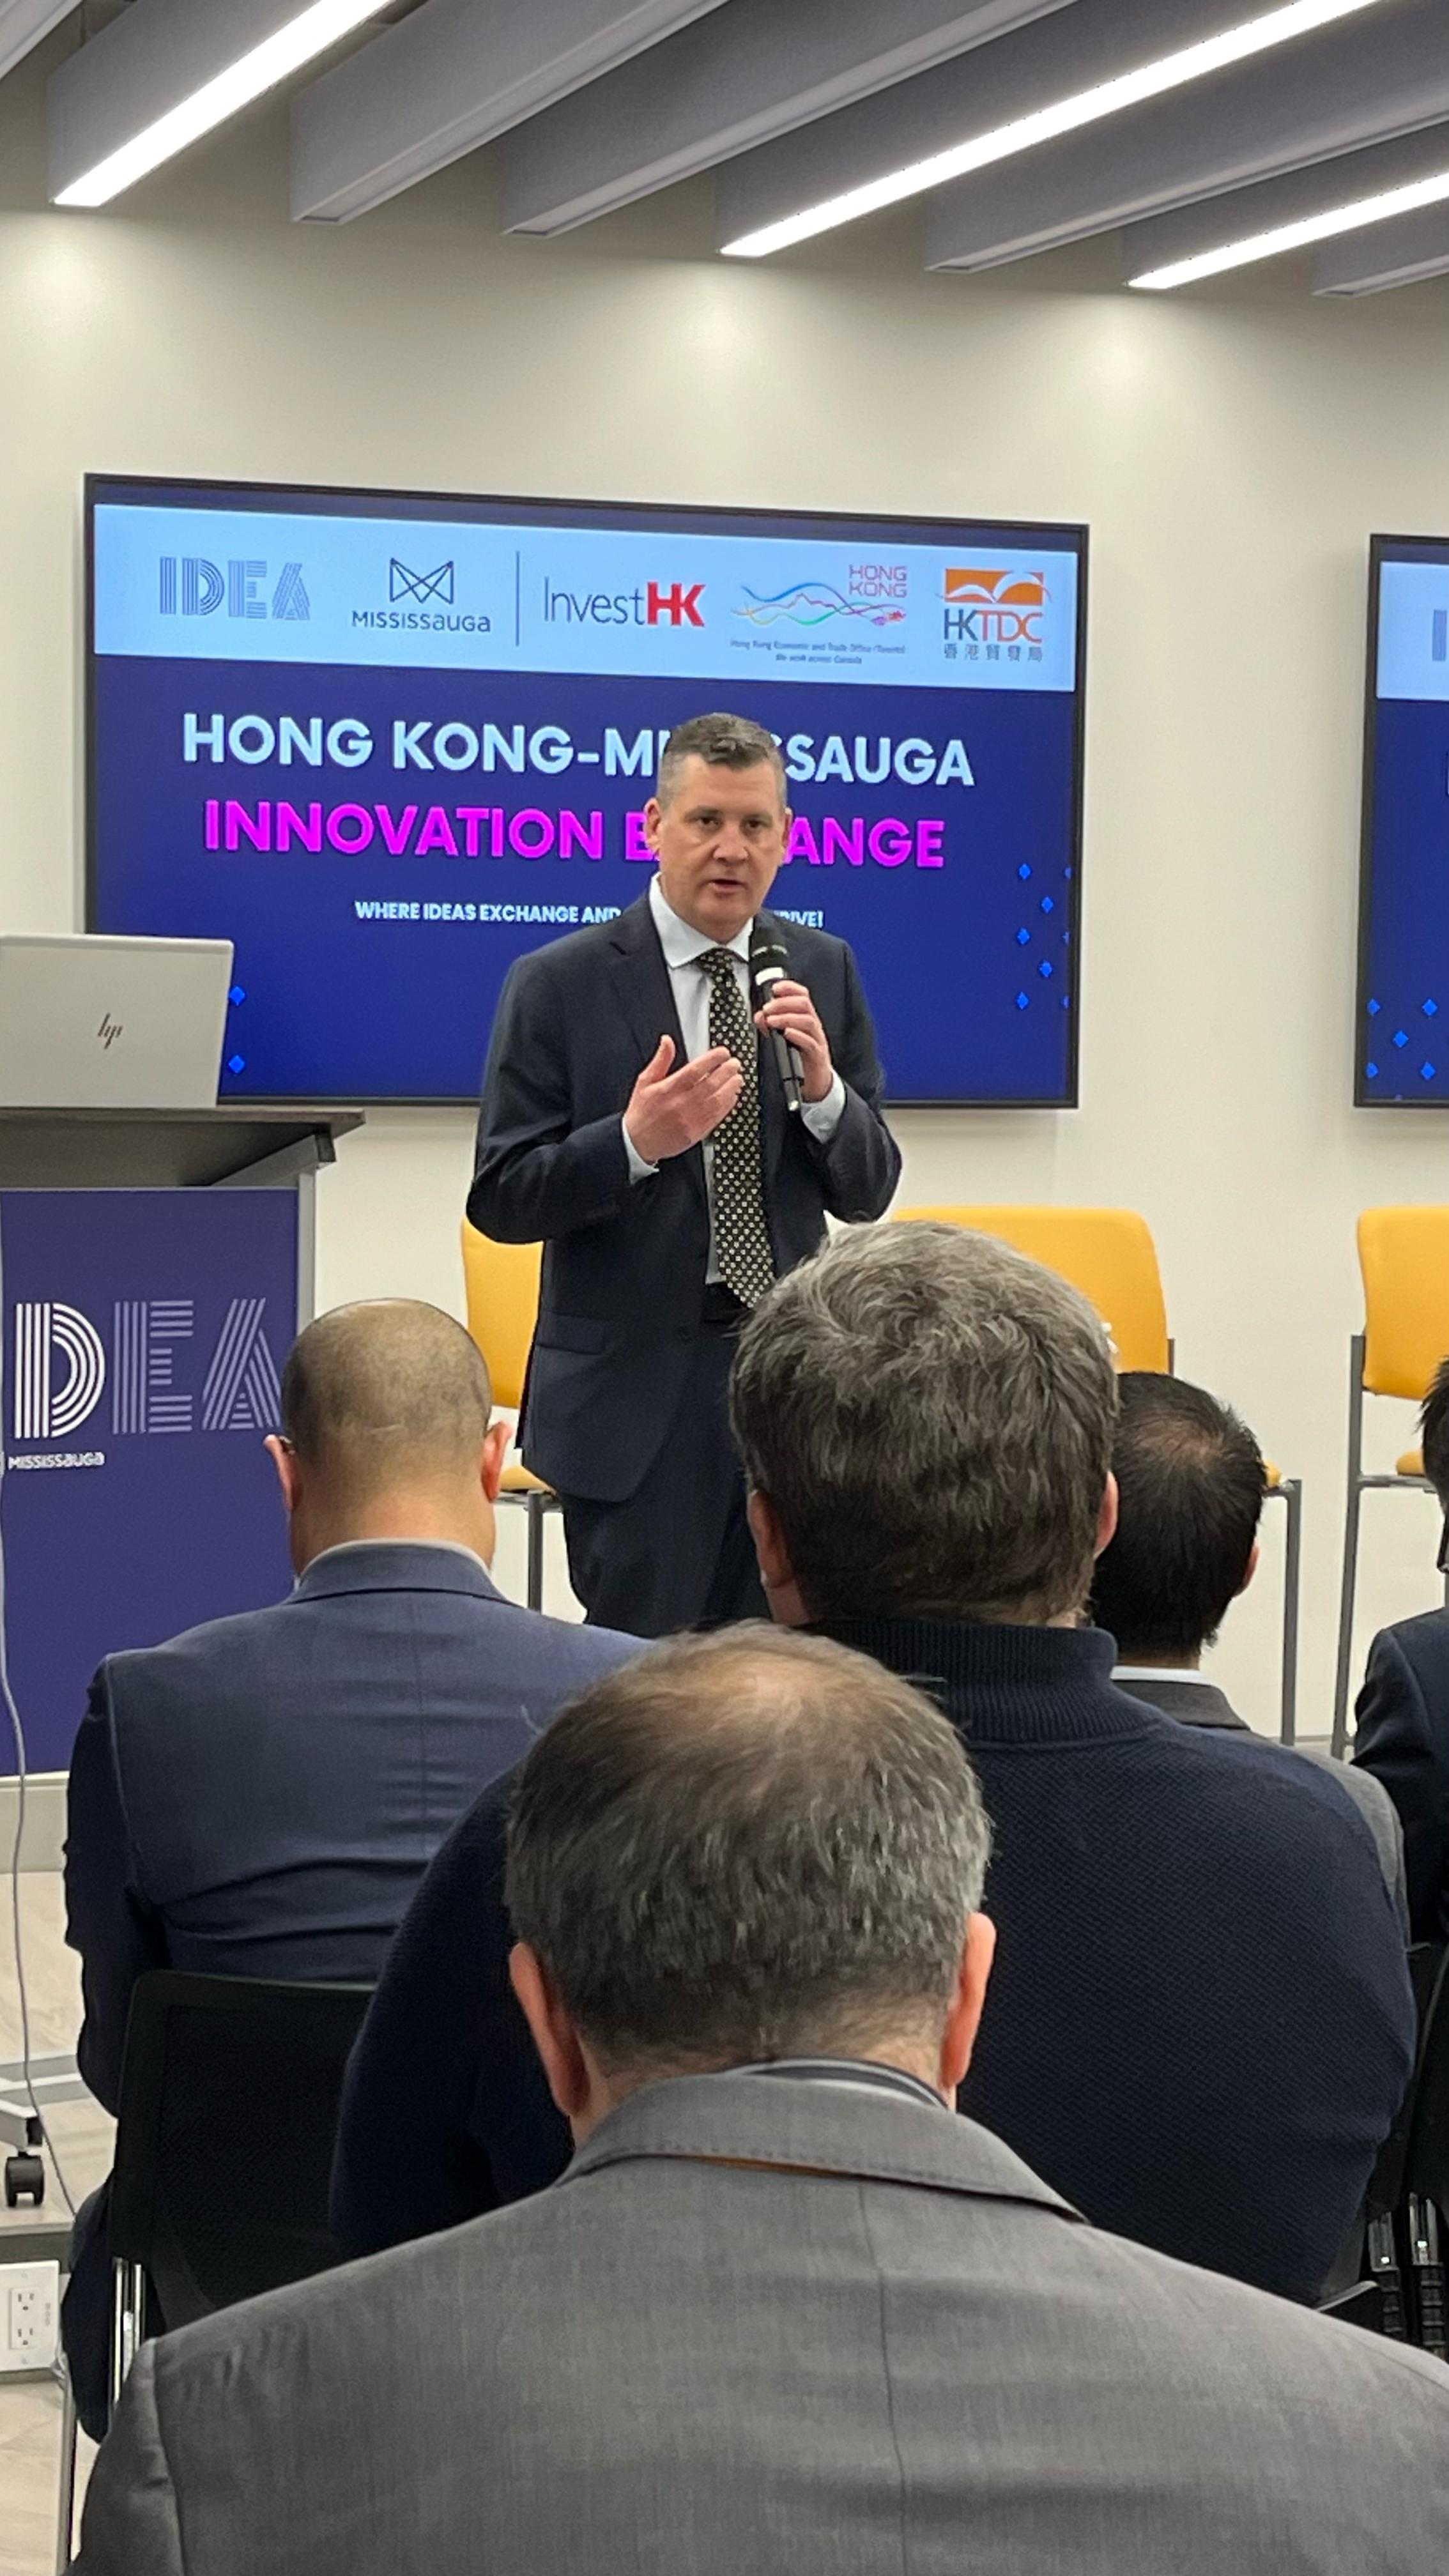 Acting Mayor of City of Mississauga, Matt Mahoney, speaks at the inaugural “Hong Kong-Mississauga Innovation Exchange” event on April 11.